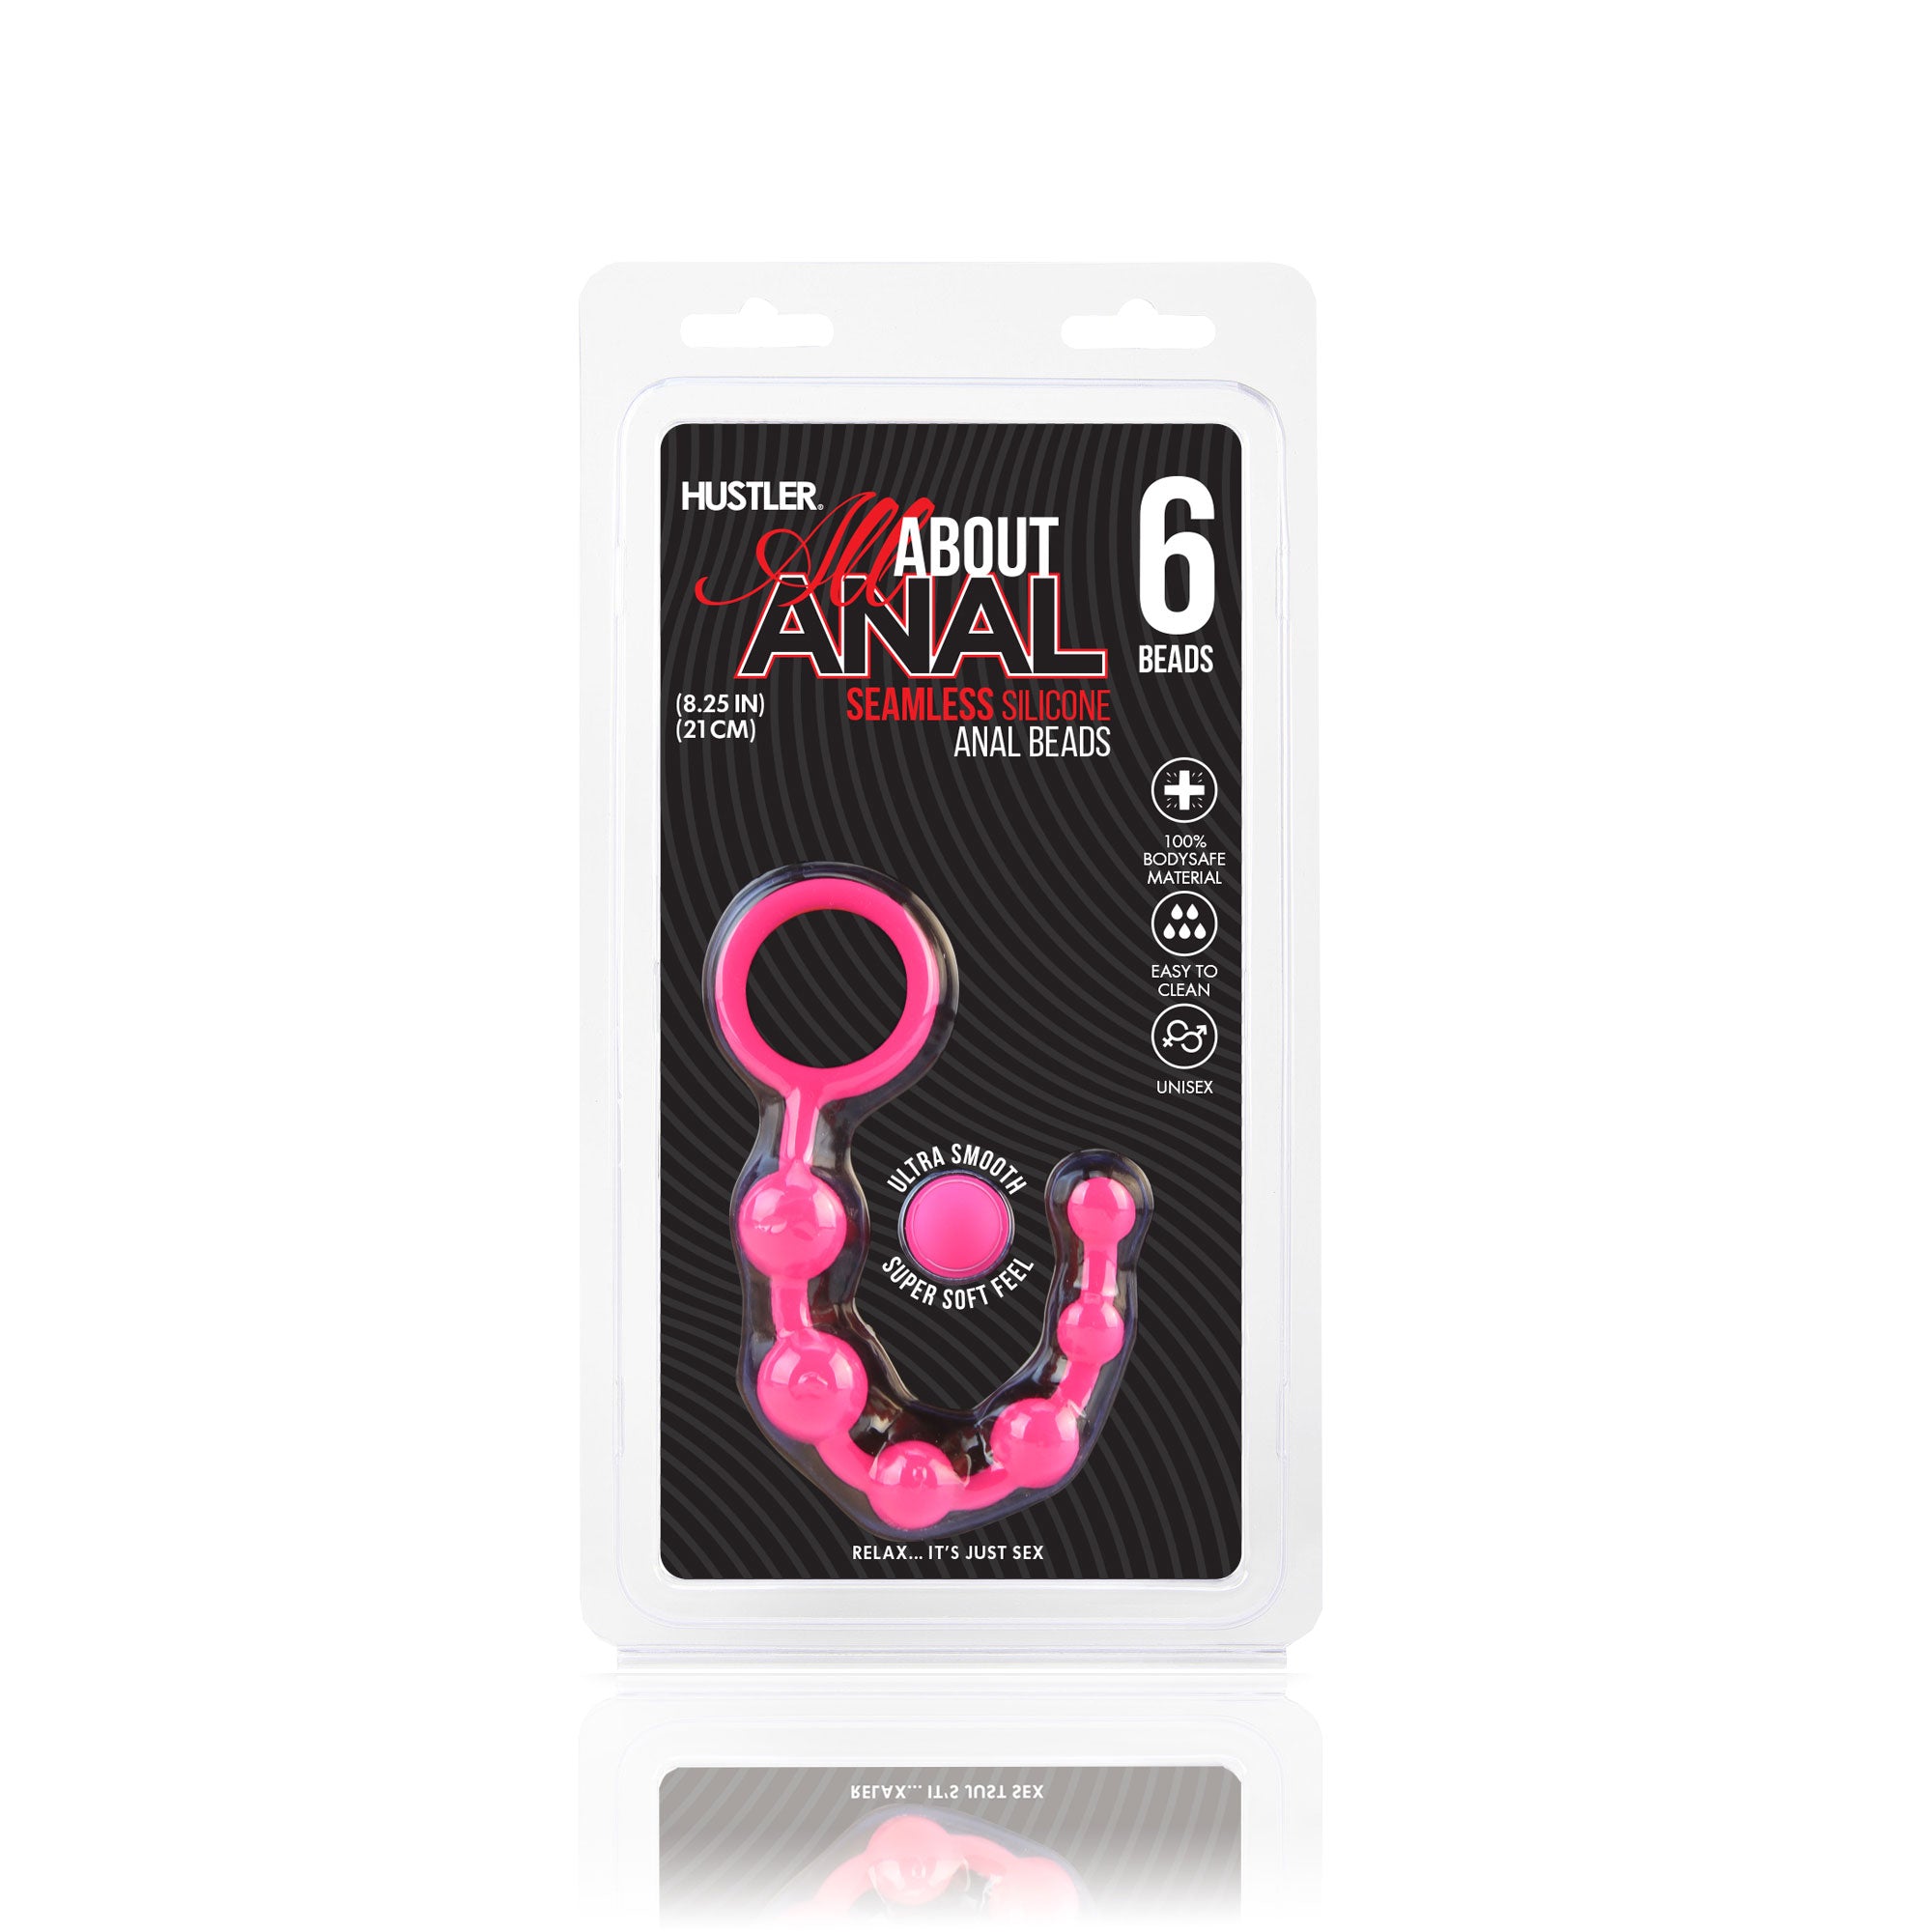 Packaging of Hustler Body-Safe Silicone Anal Beads (6 Beads) in Pink at glastoy.com